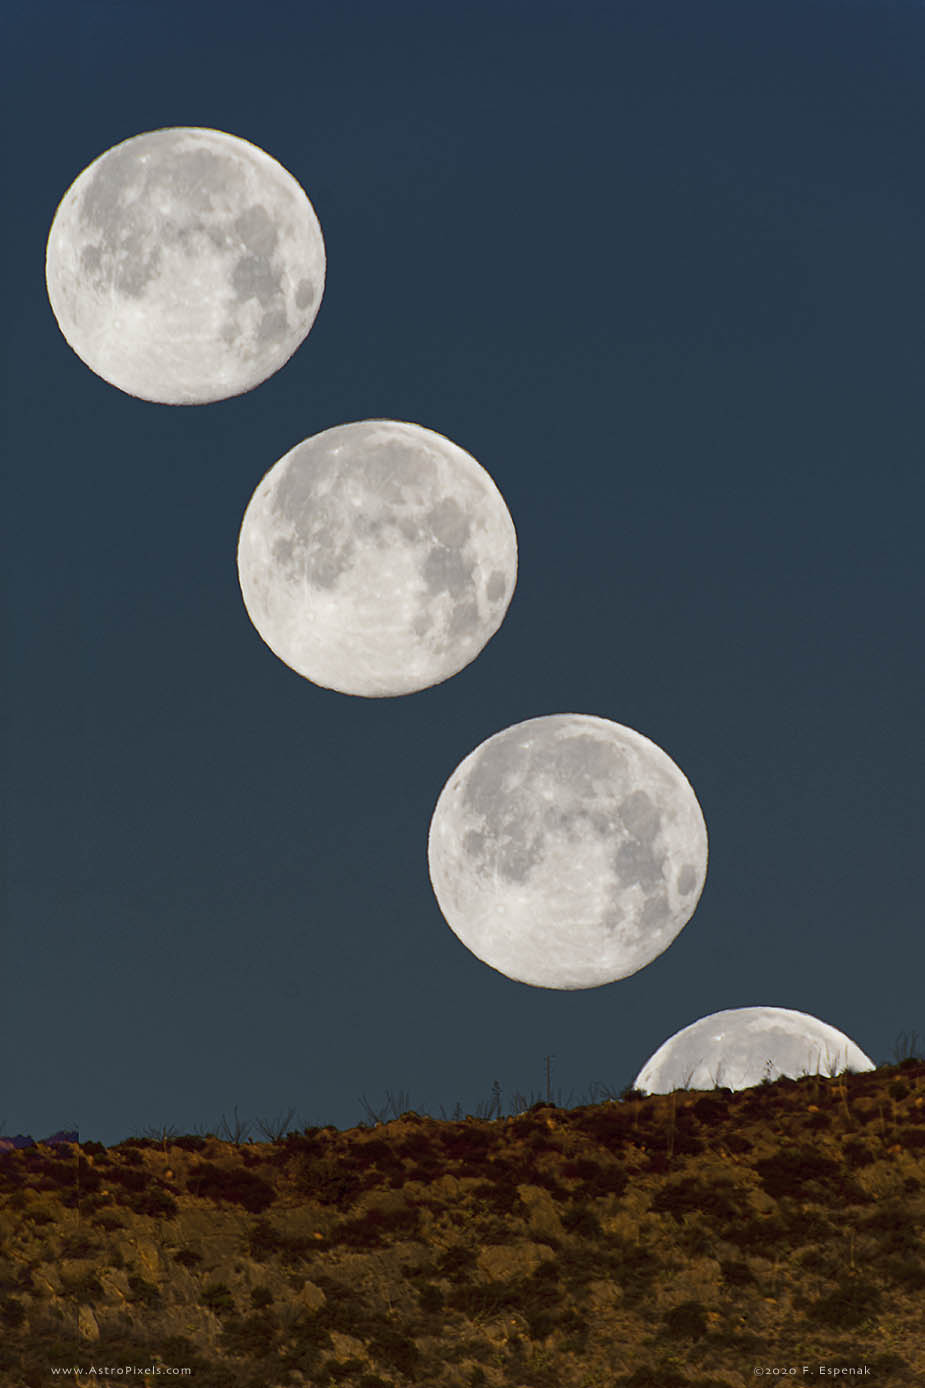 Moonset Sequence Over Limestone Mountain - 3